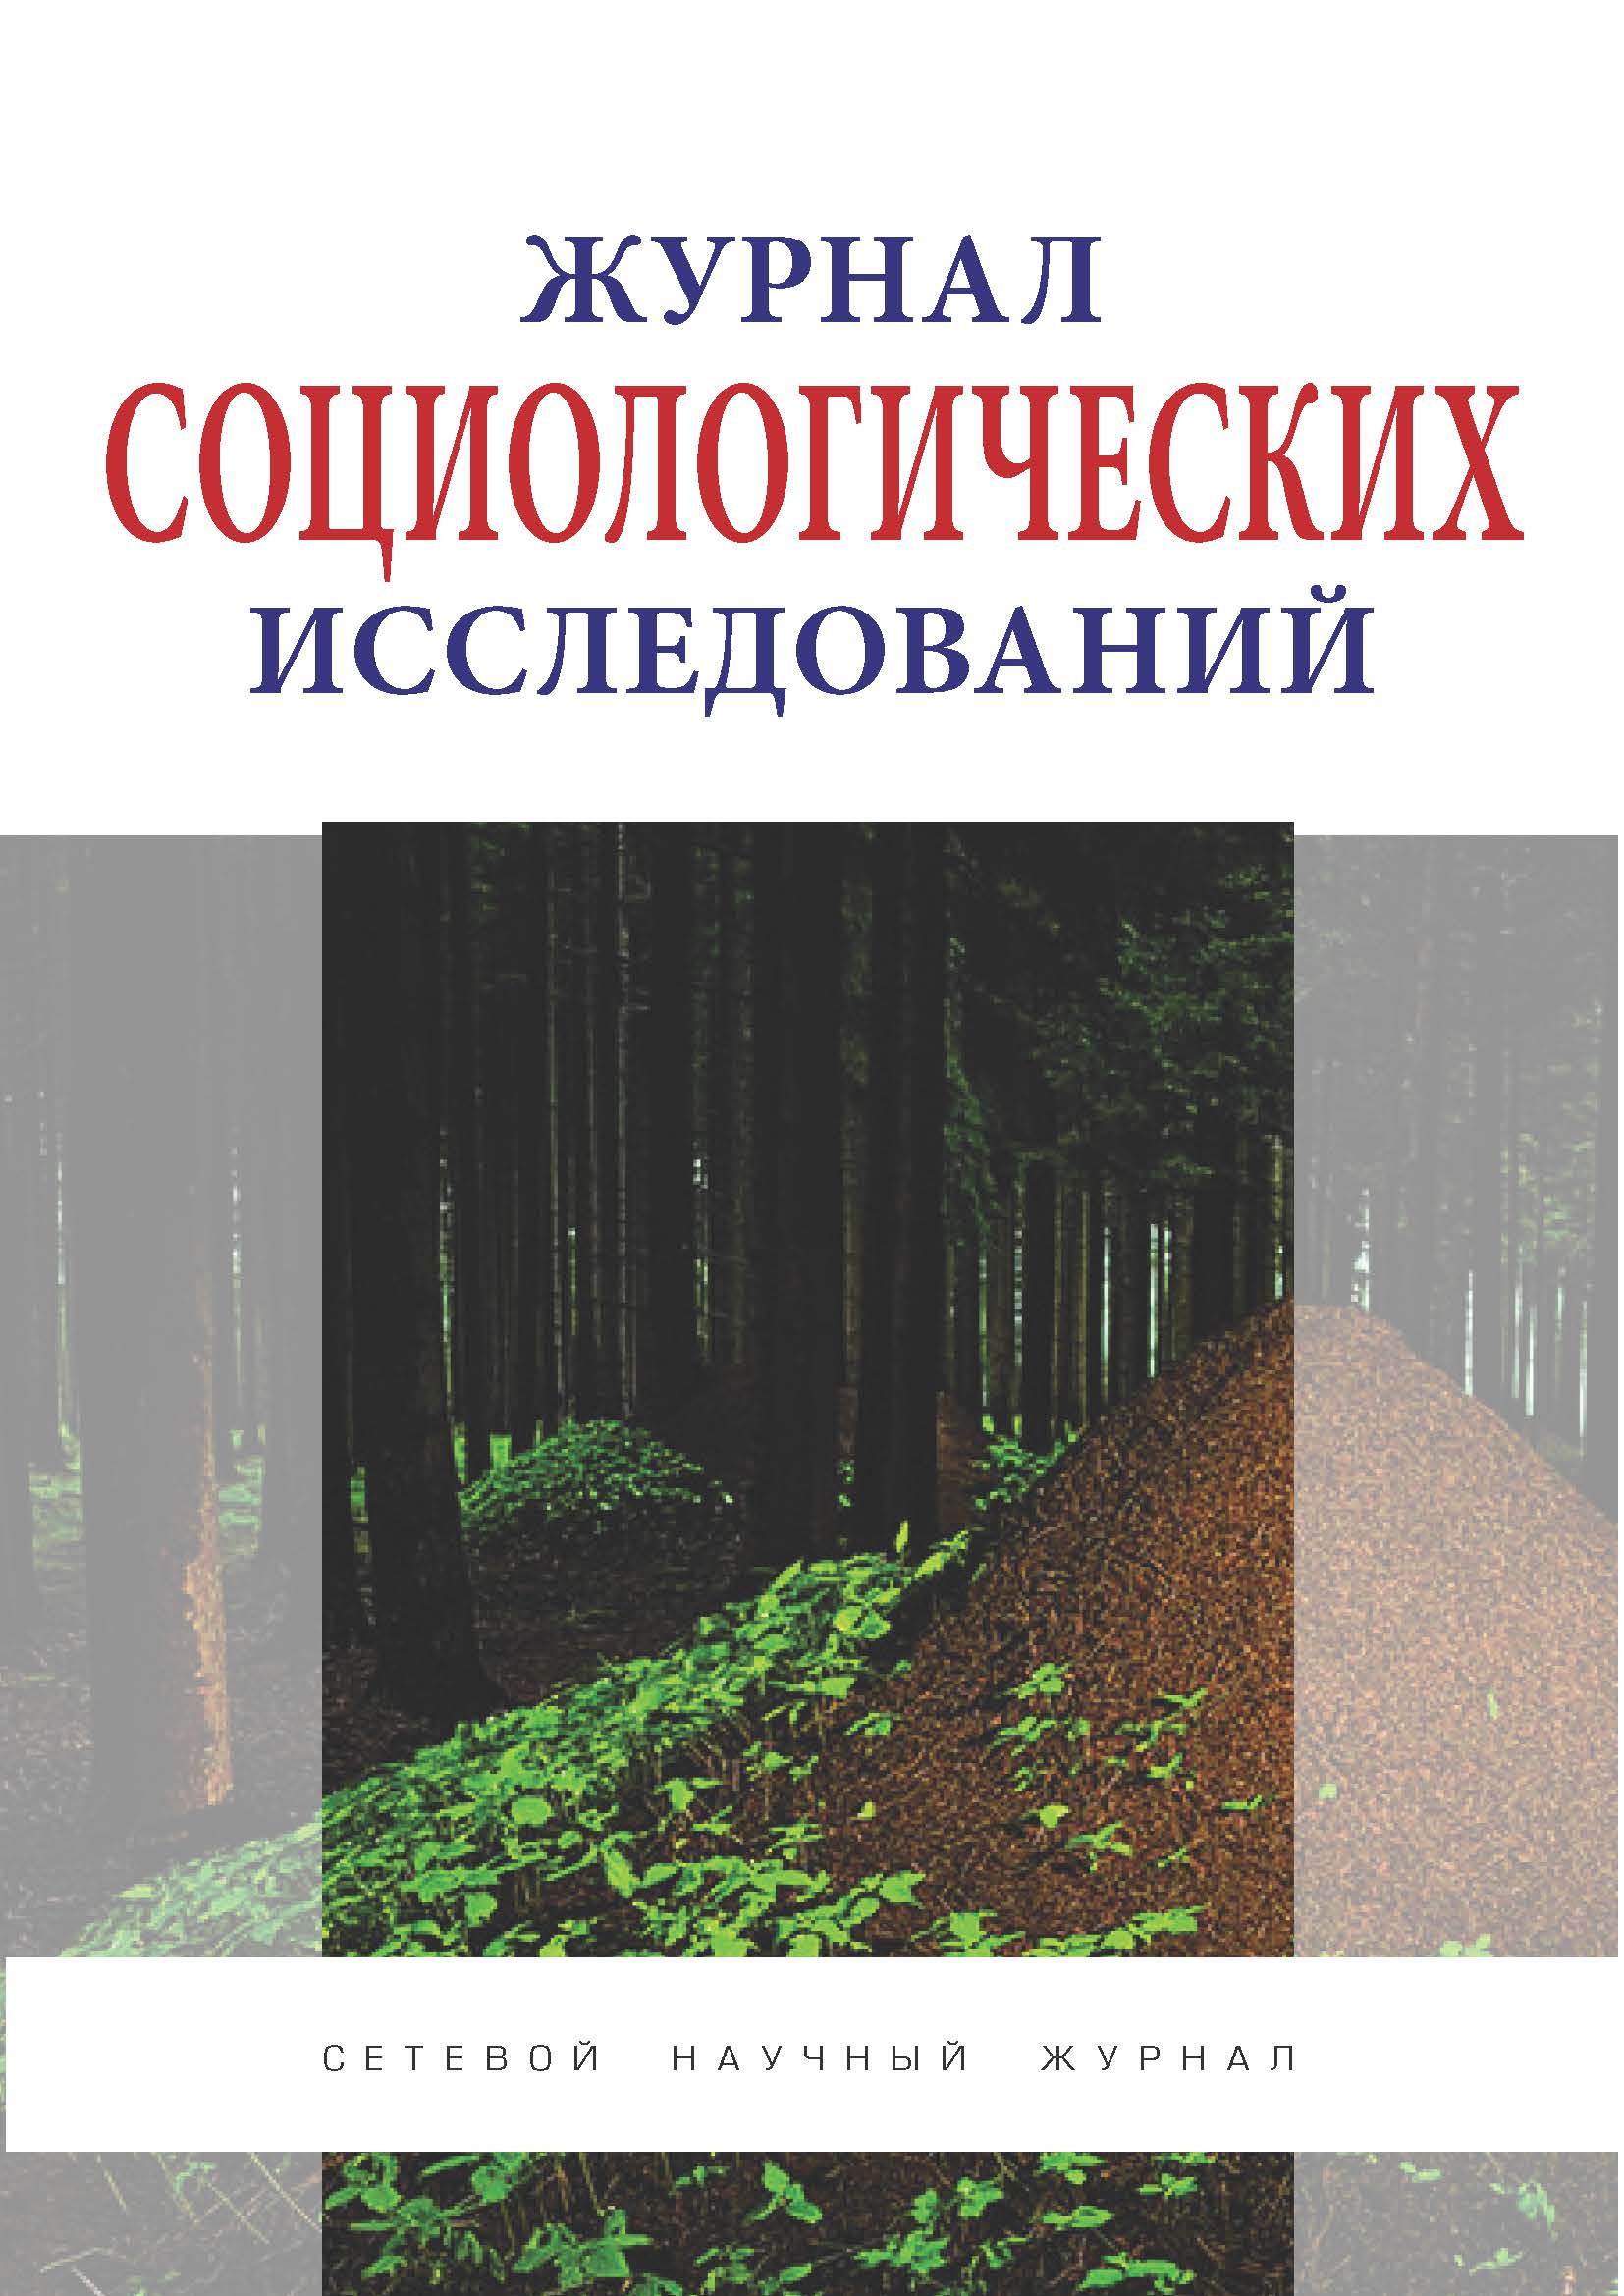                         New approaches to social sciences (Review of the book of Doctor of Economic Sciences, Professor I.S. Gladkov, M.G. Piloyan “History of World Economy”, Moscow, INFRA-M, 2018)
            